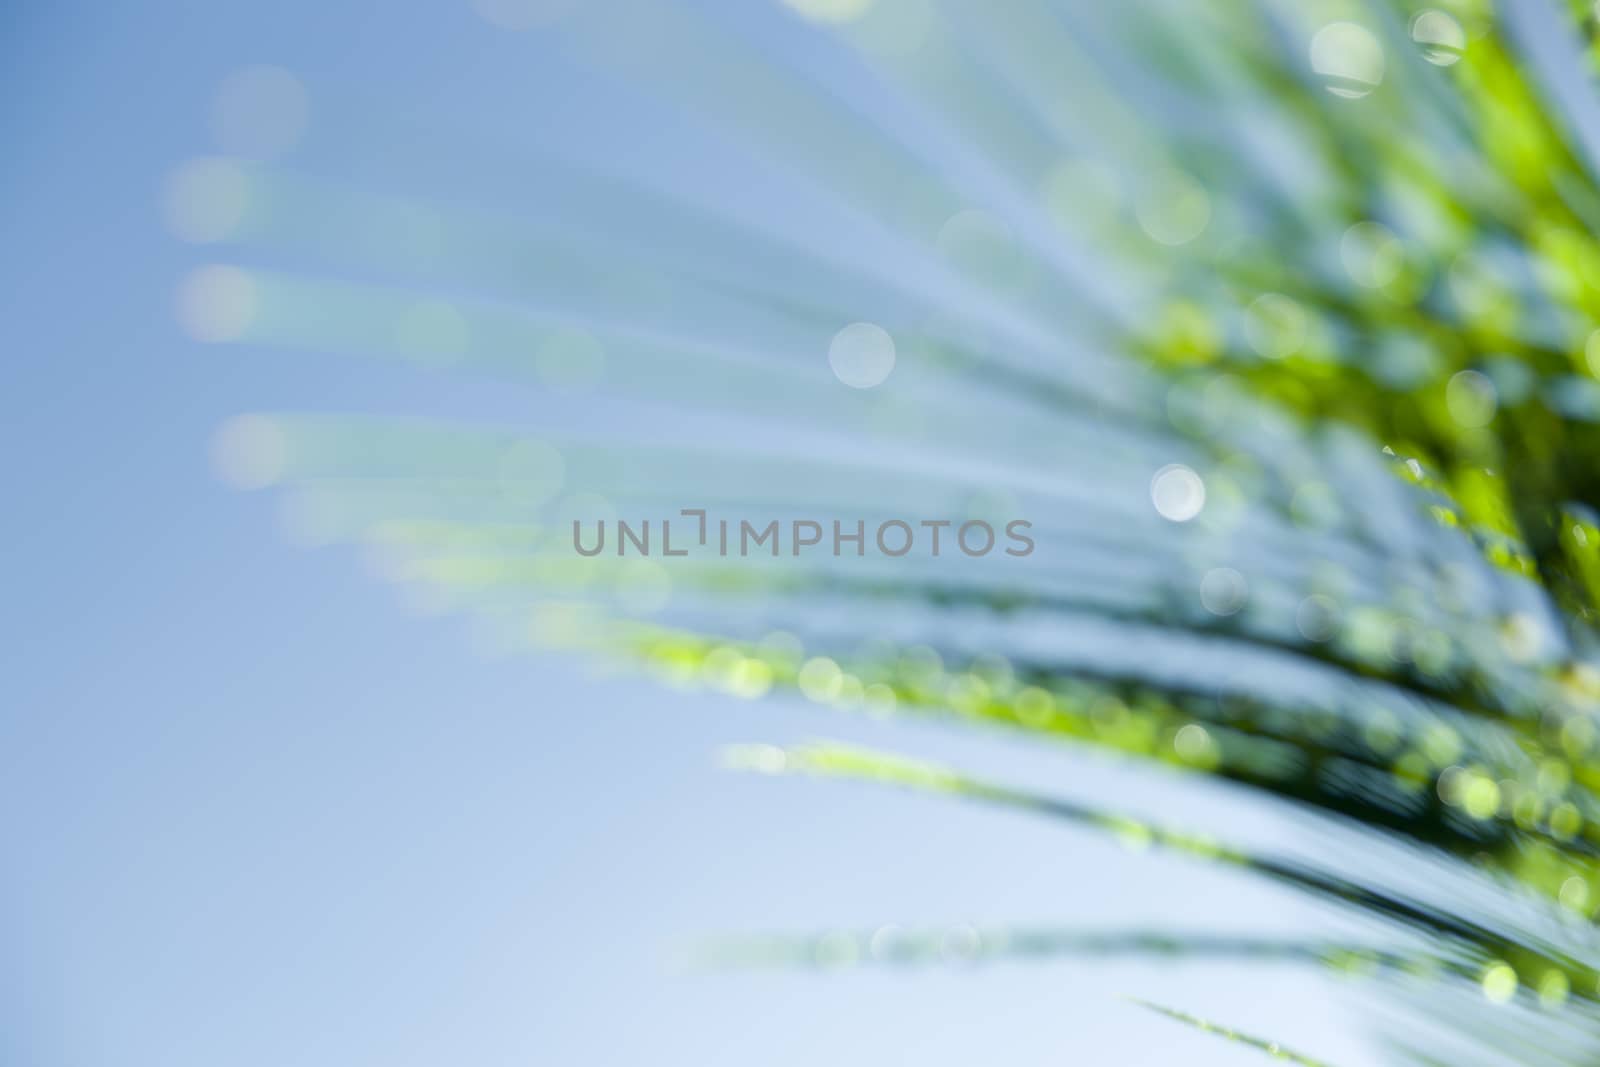 Defocused Cycad frond light catching on dew drops against blue sky.